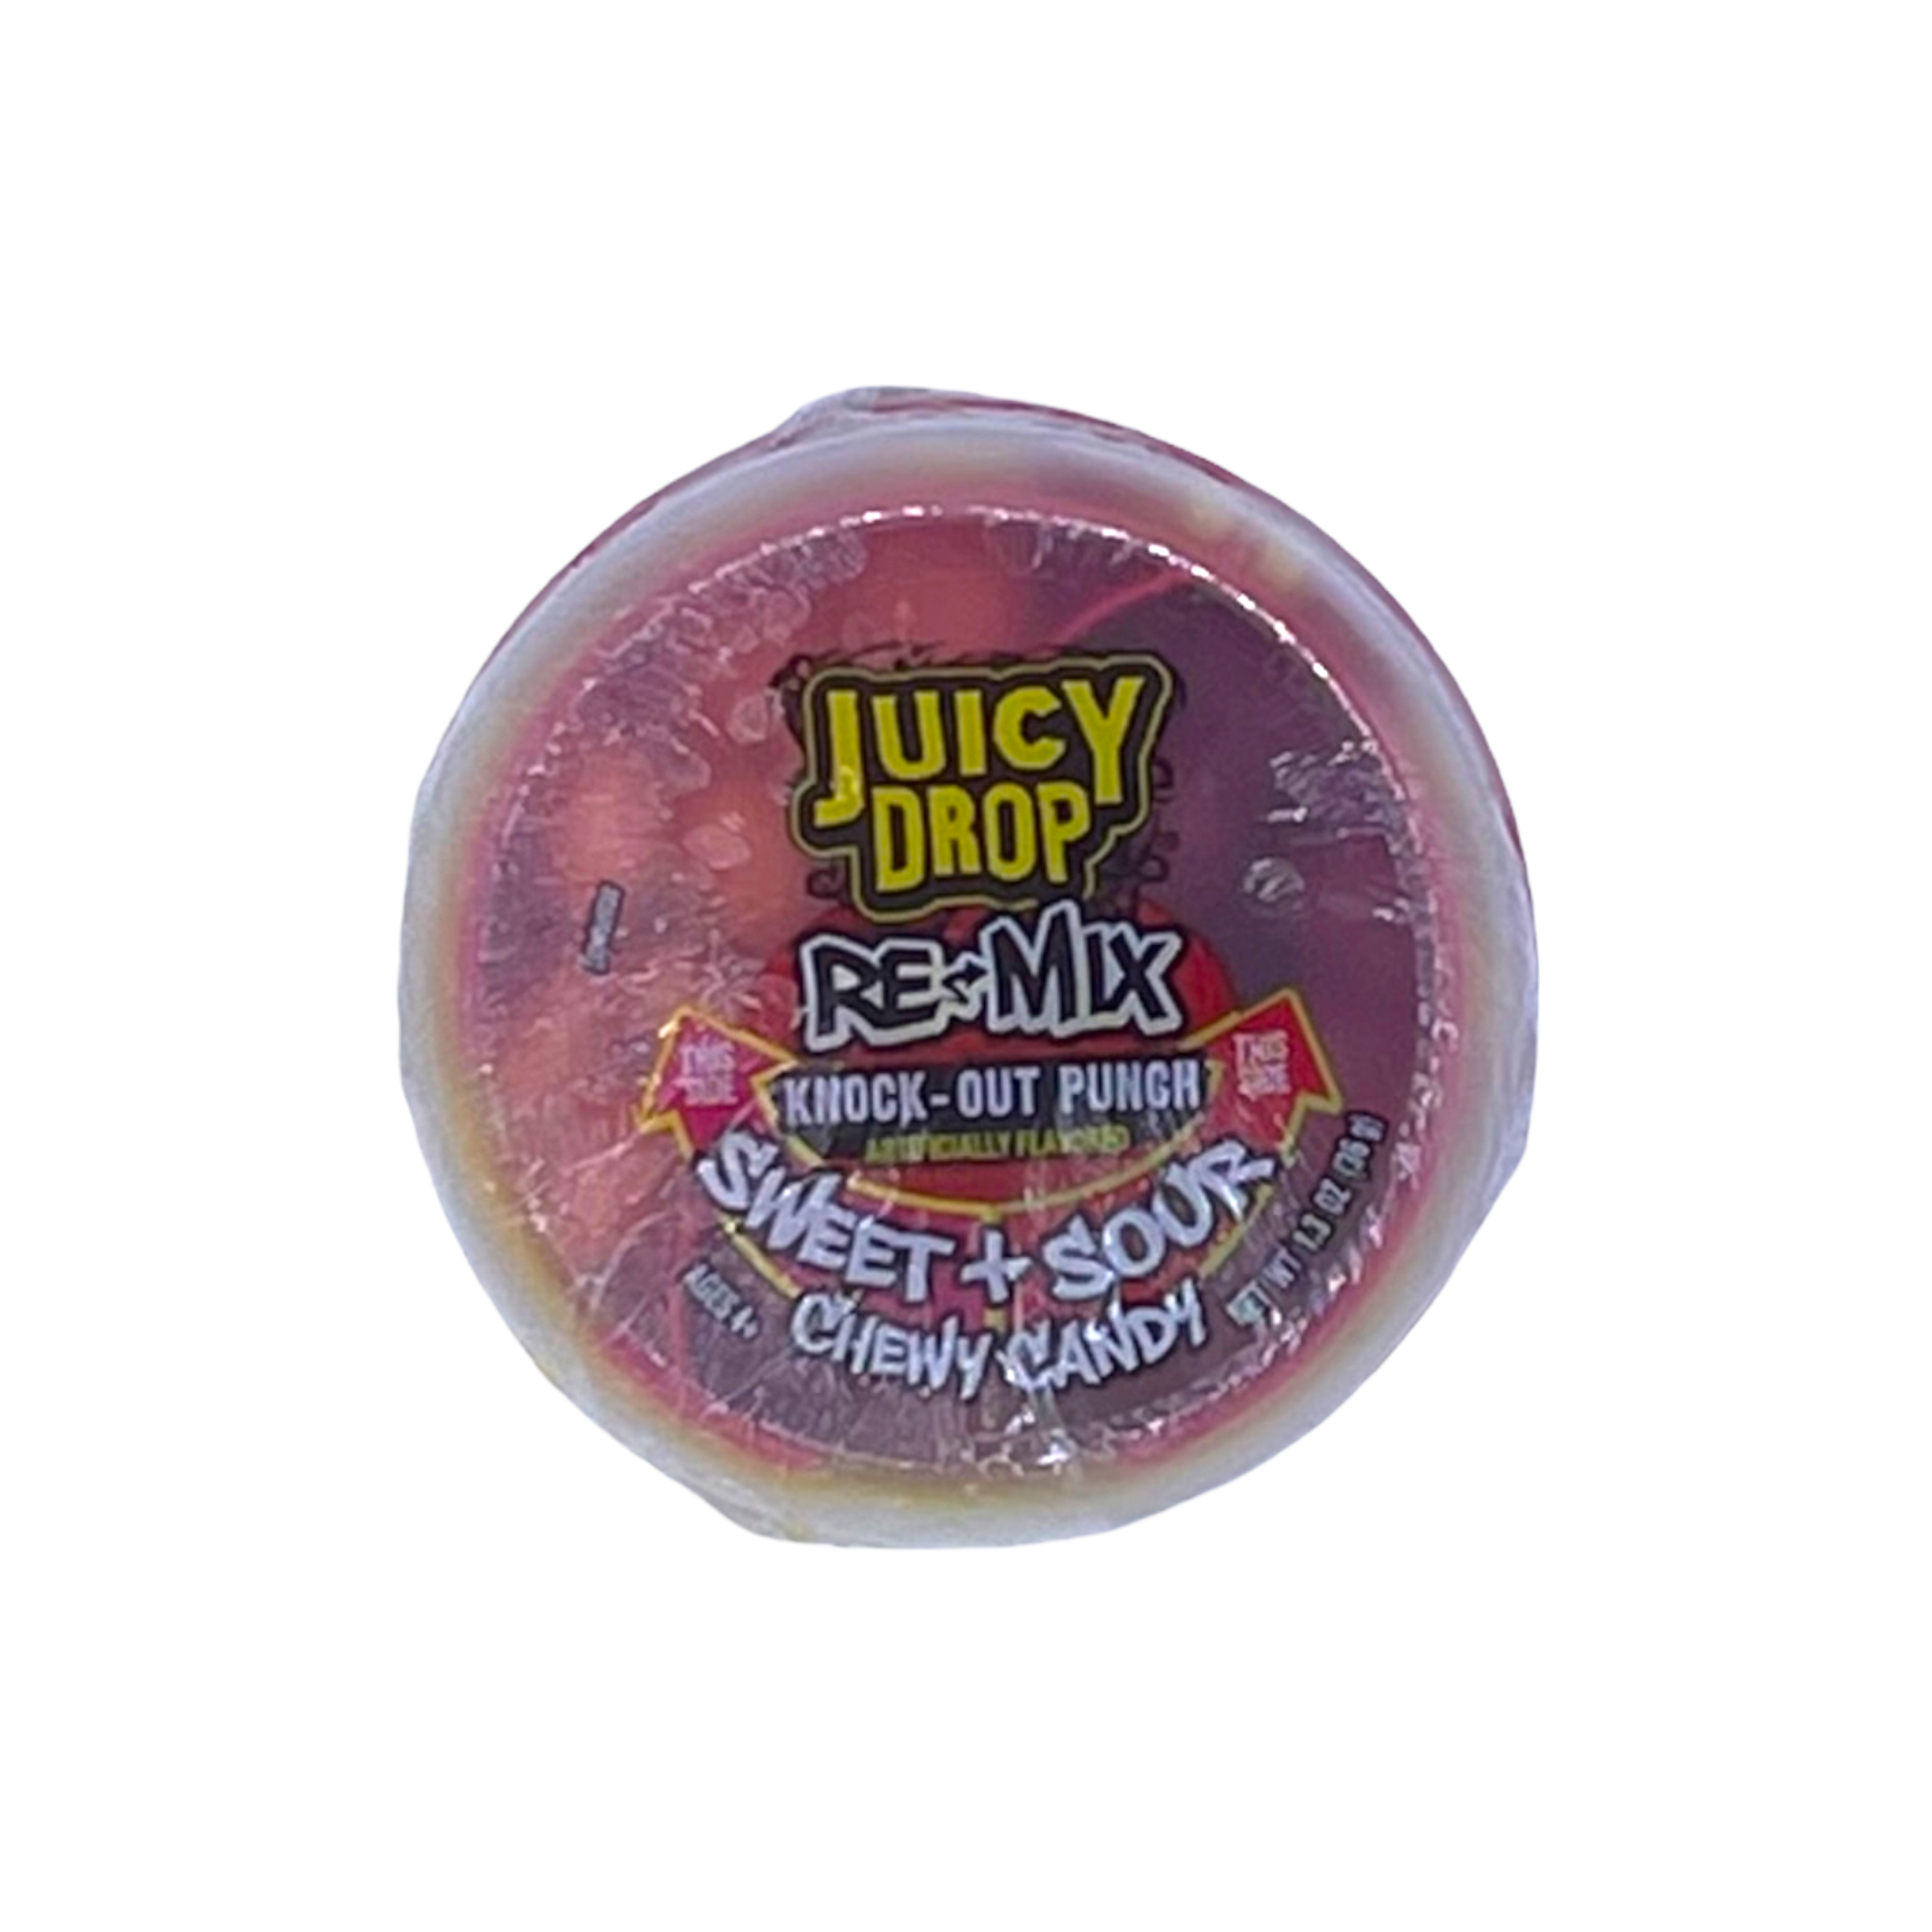 Juicy drop remix sweet and sour